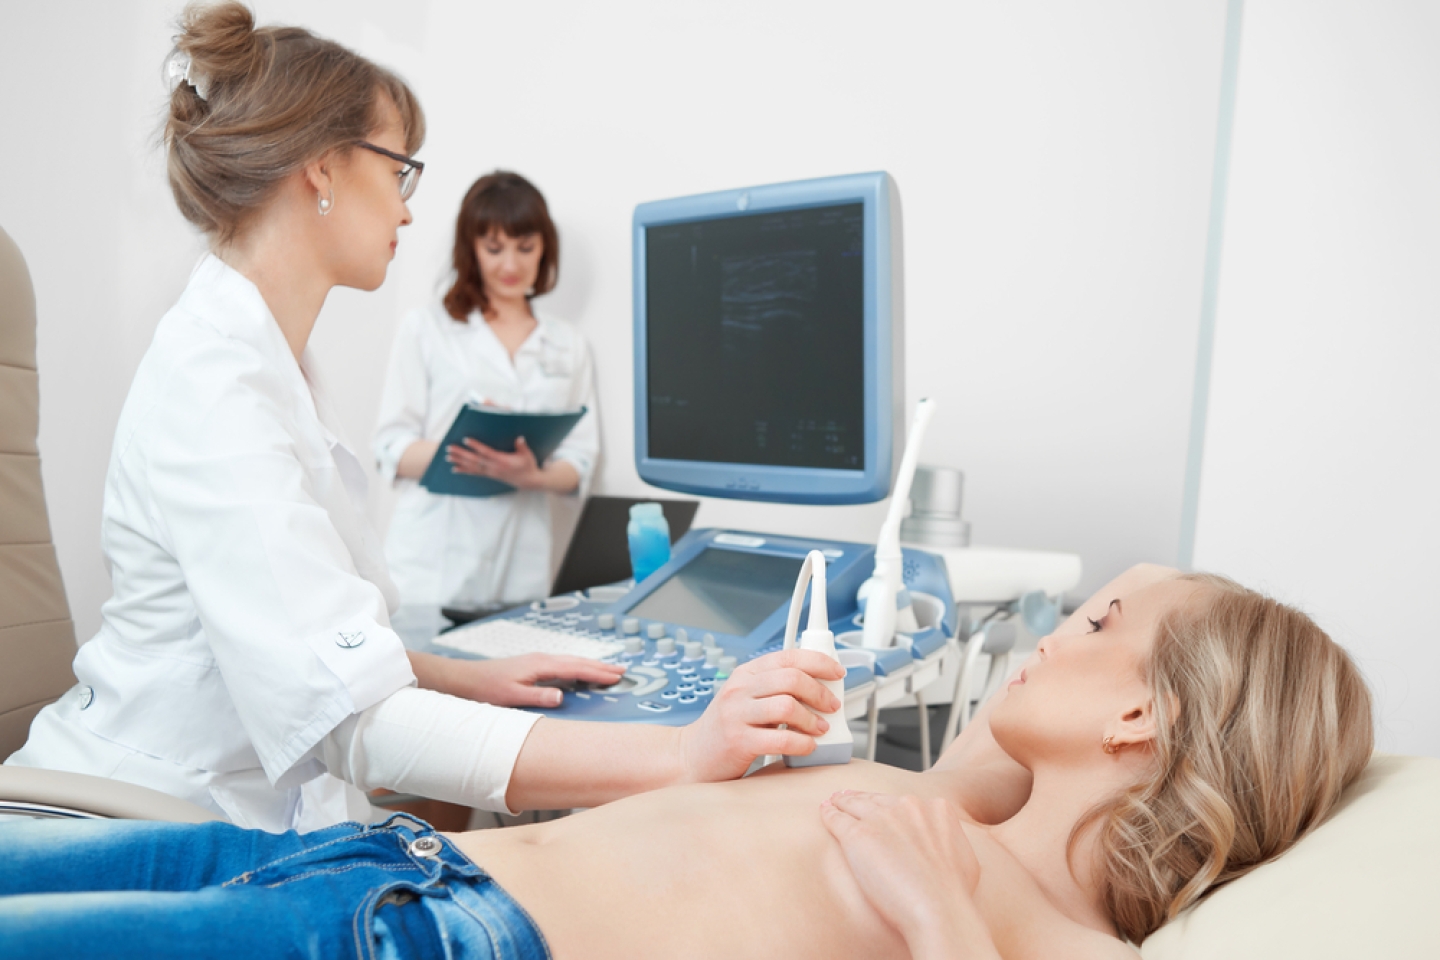 getting breast examination with ultrasound